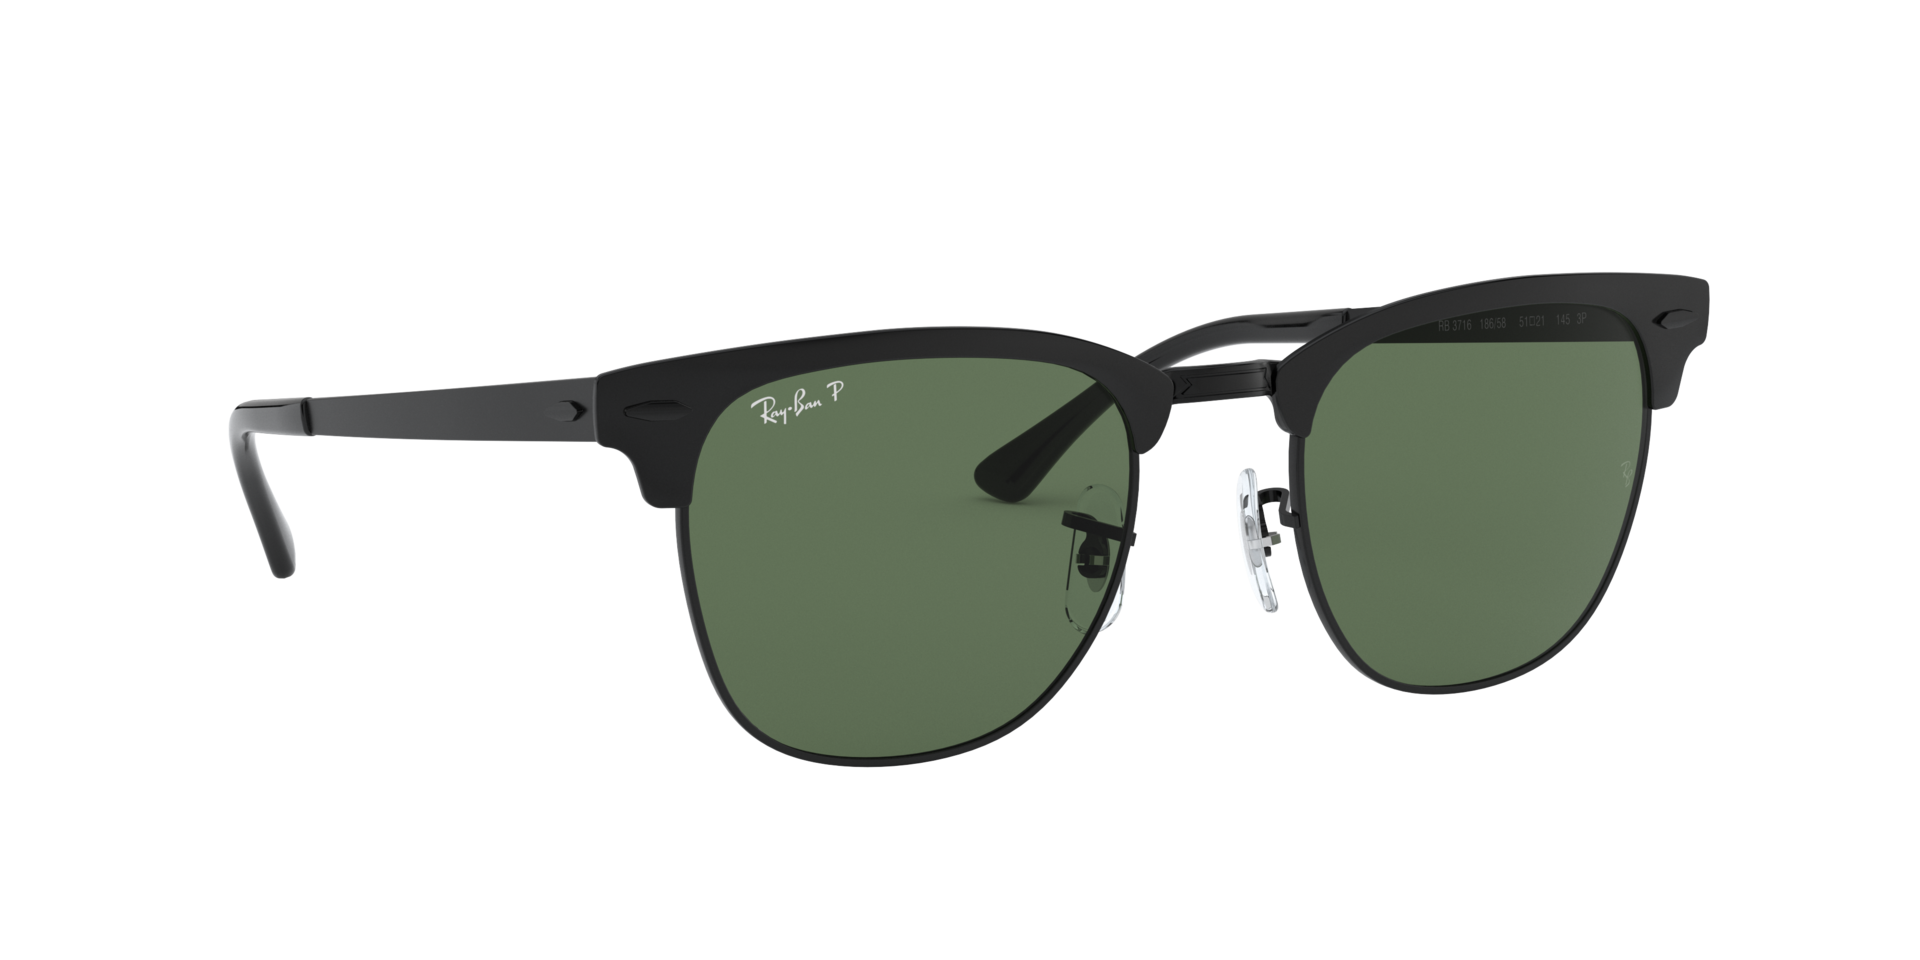 Buy Best Ray-Ban Clubmaster Metal Sunglasses Online